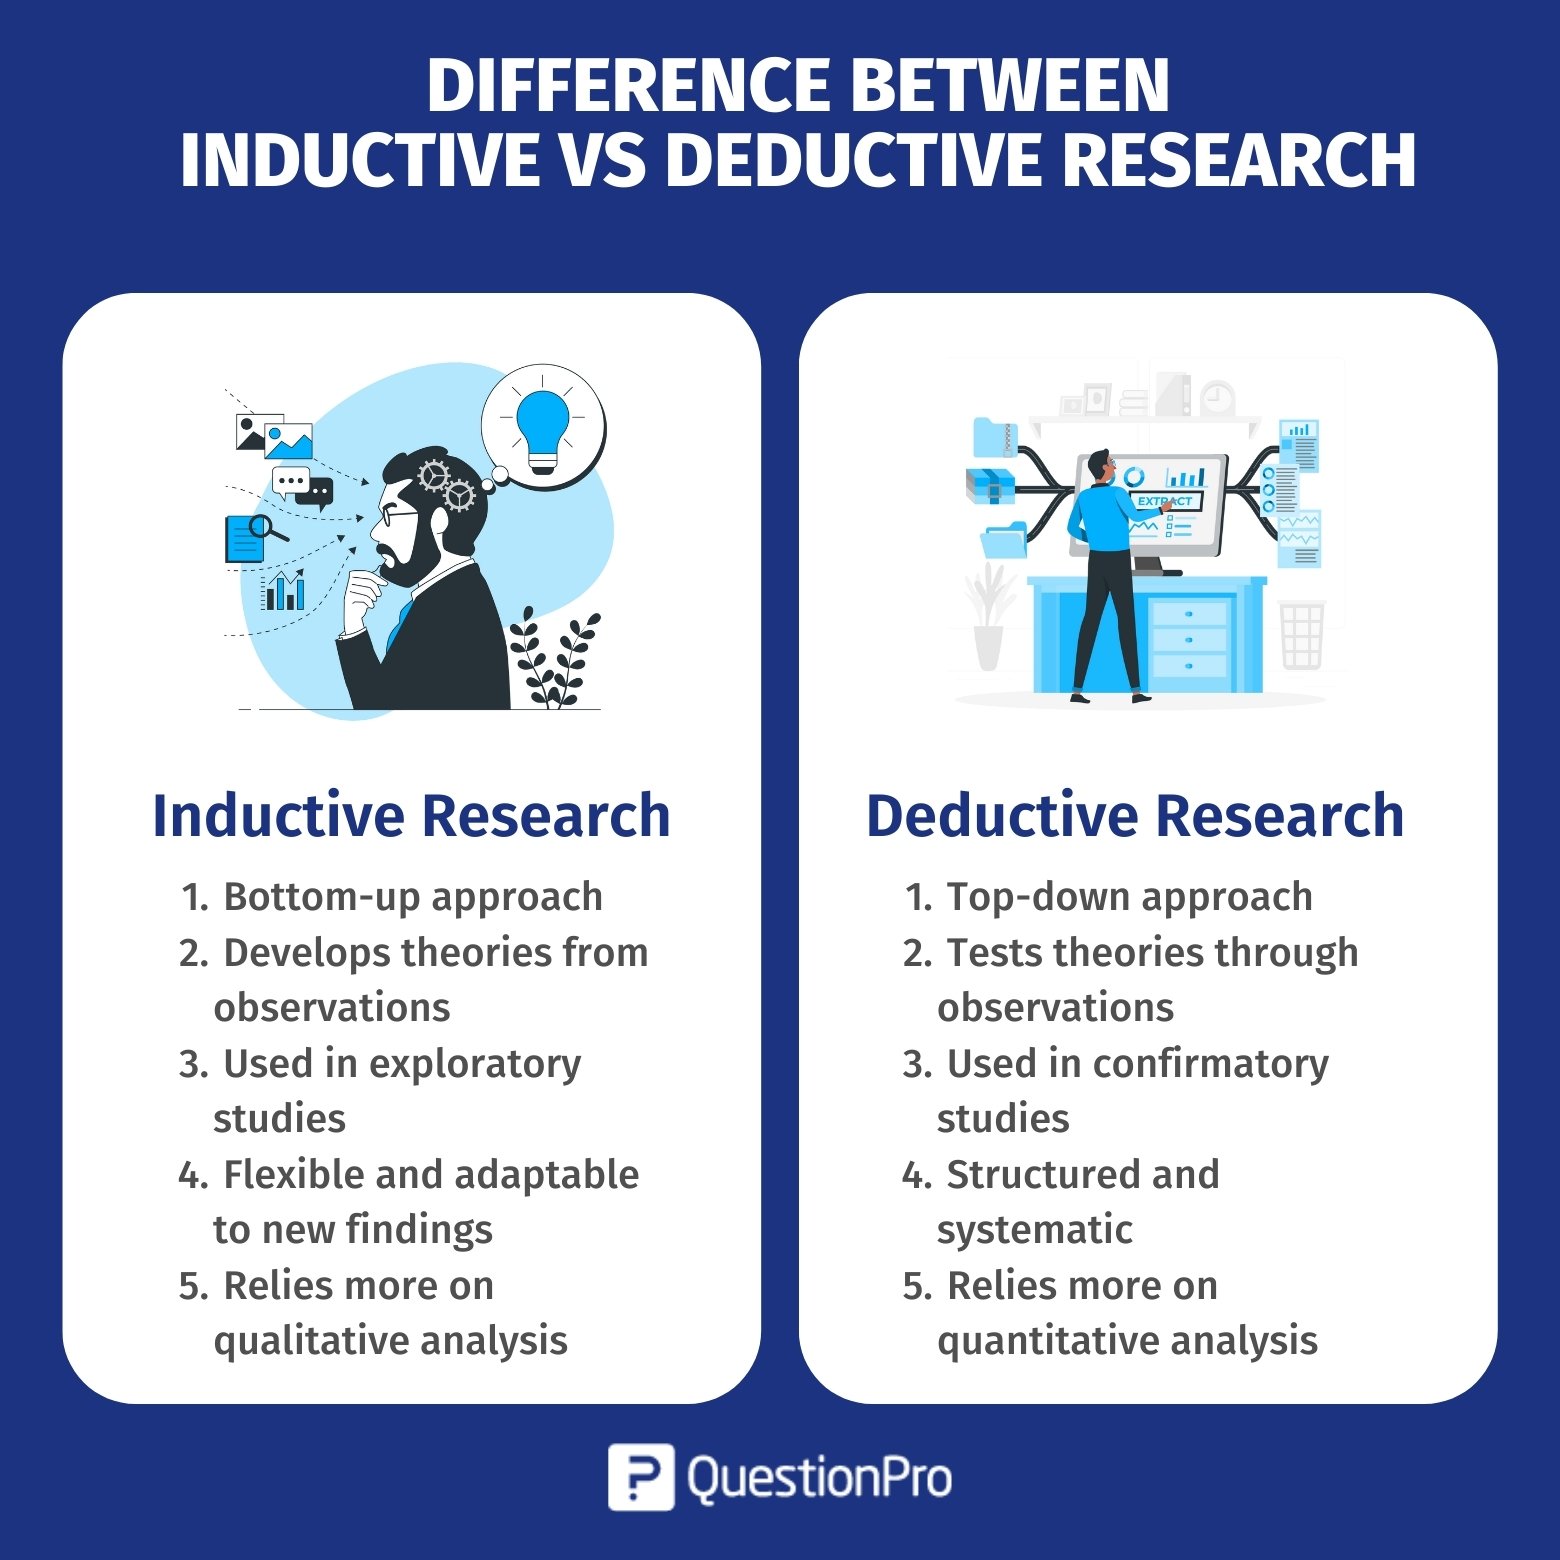 qualitative research uses inductive approach to test theory